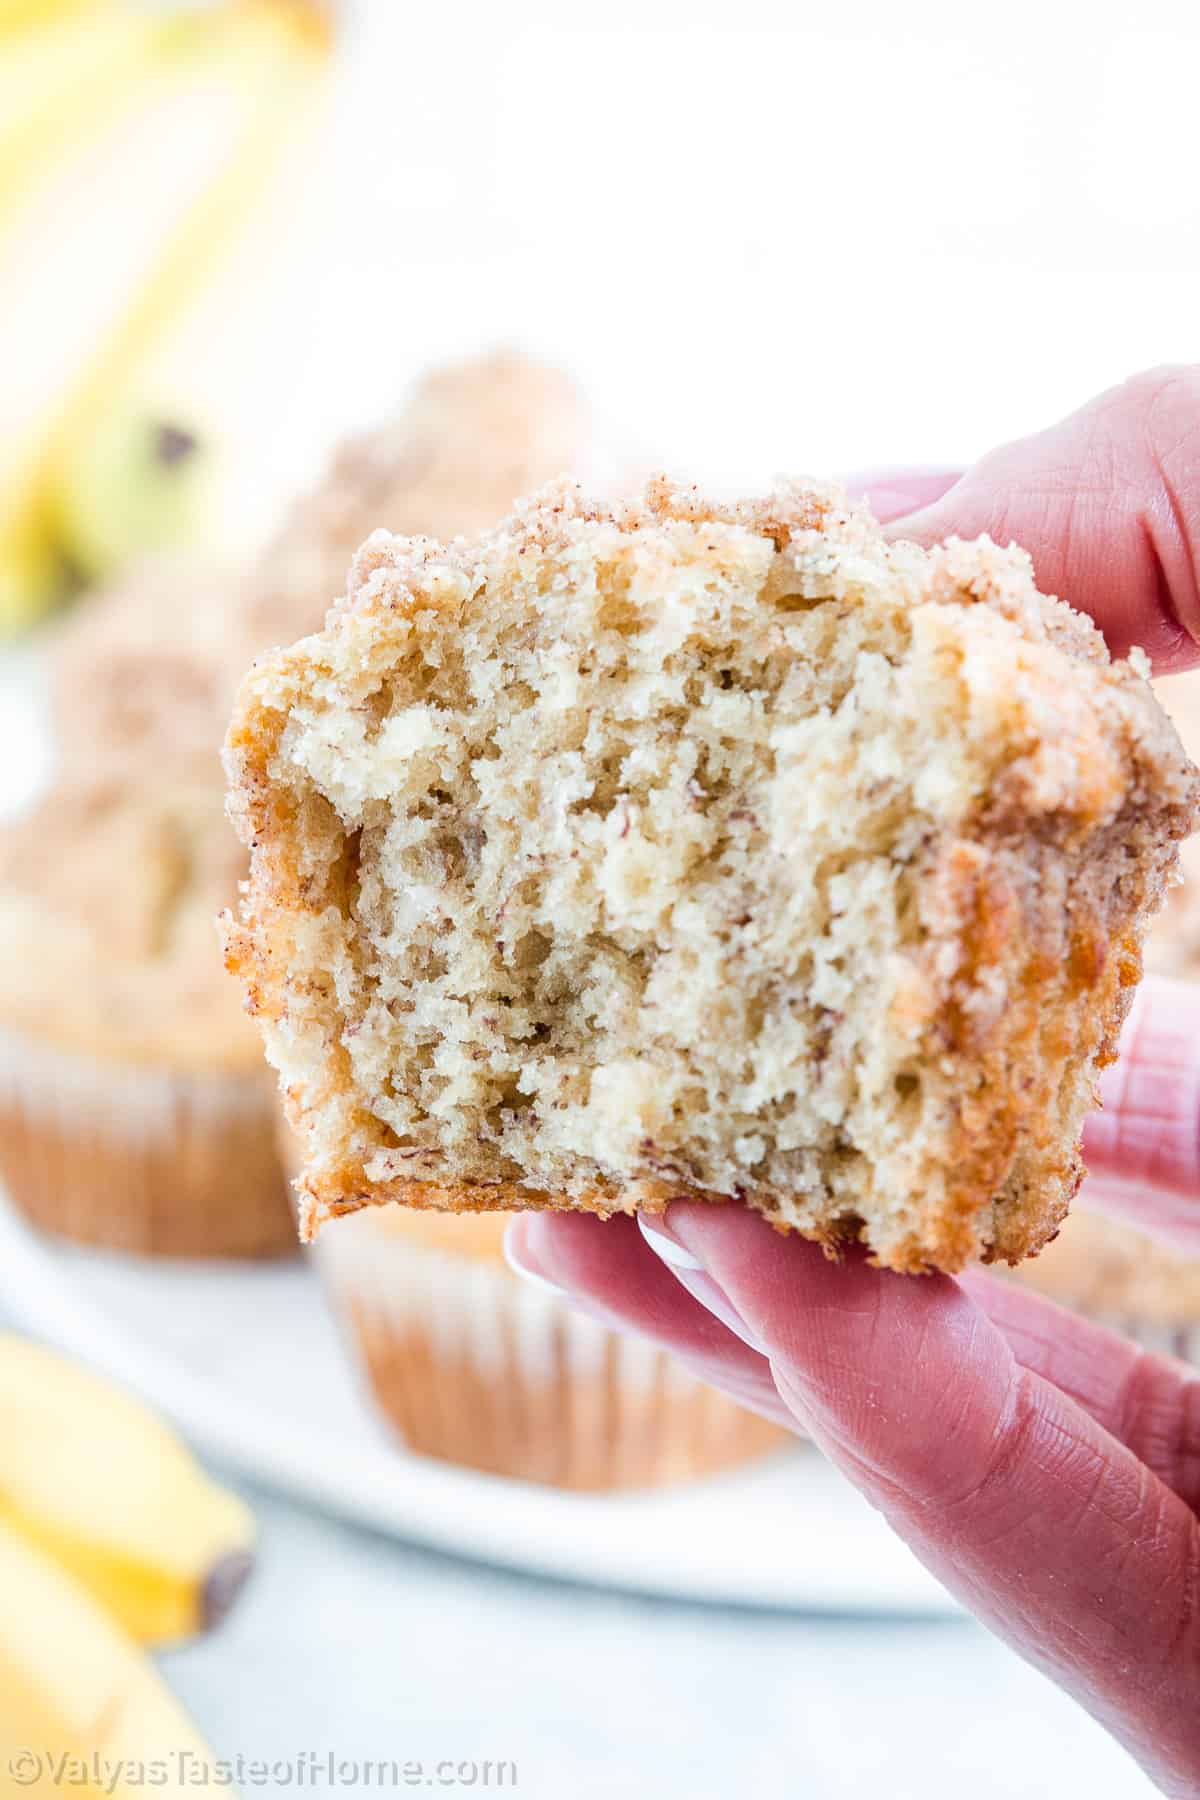 With their perfect moist, fluffy texture, rich banana flavor, and delicious streusel topping, they're ideal for breakfast, a lunchbox treat, or a warm dessert paired with a scoop of ice cream.